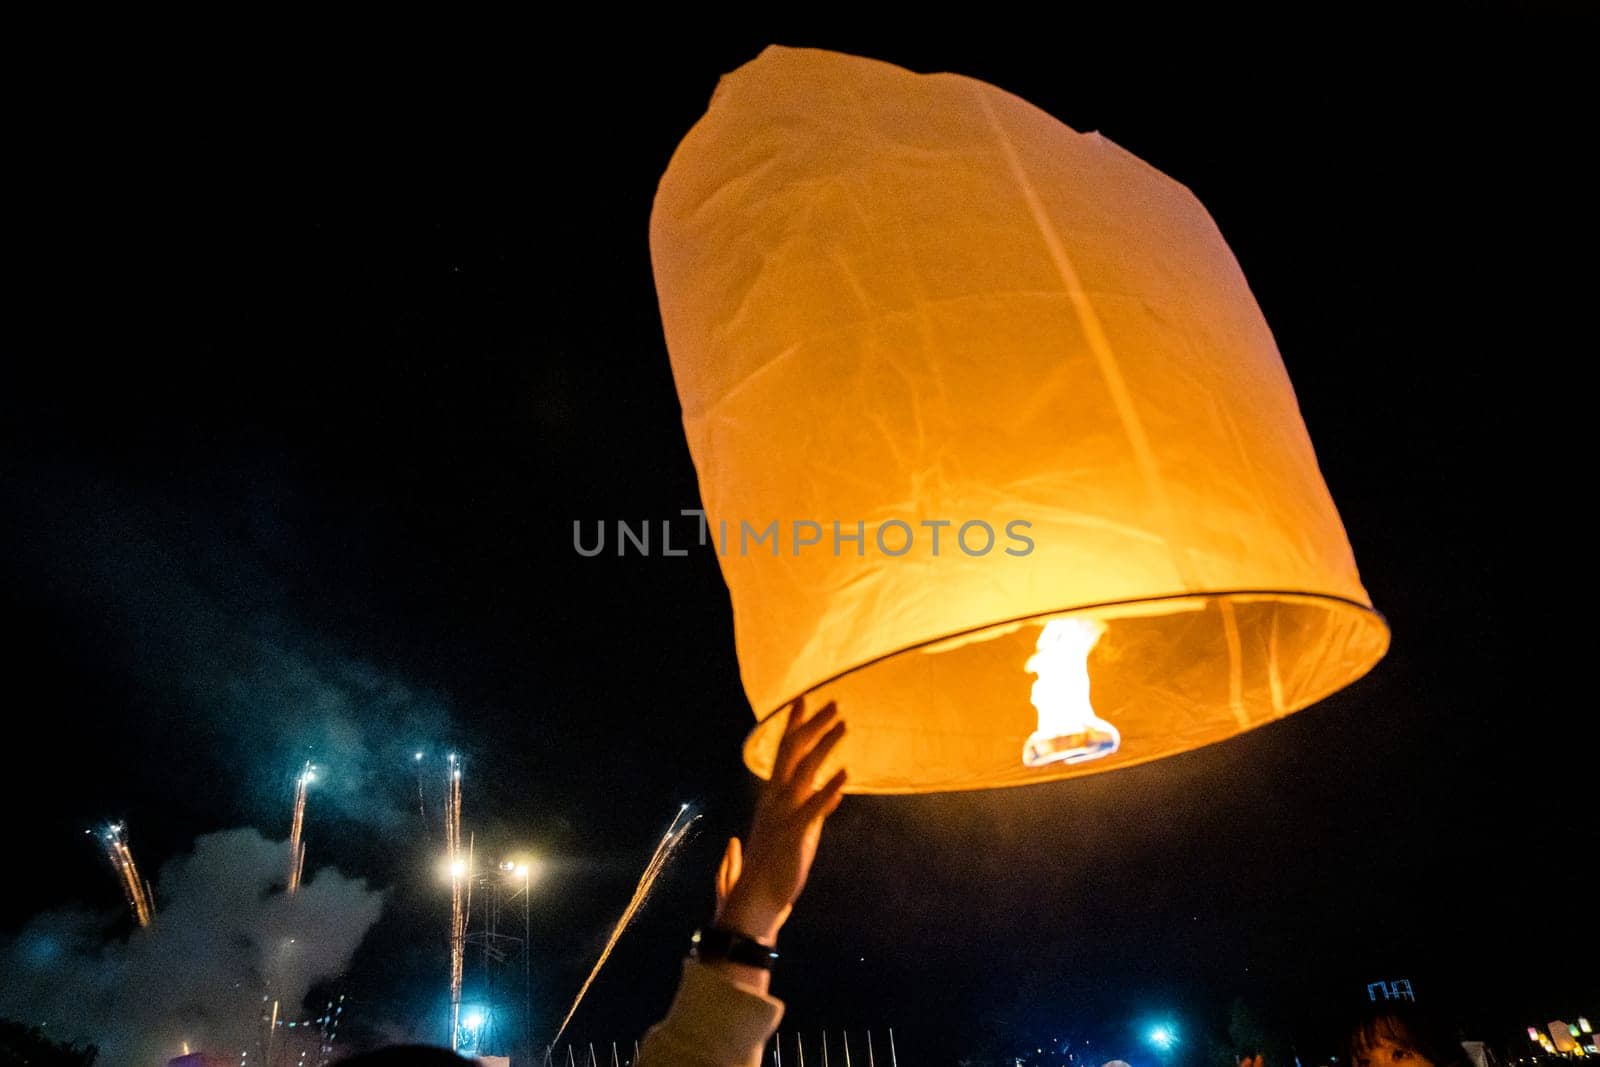 Sky lantern mass release event for Yee Peng and Loy Krathong traditional festival in Chiang Mai, Thailand by worldpitou